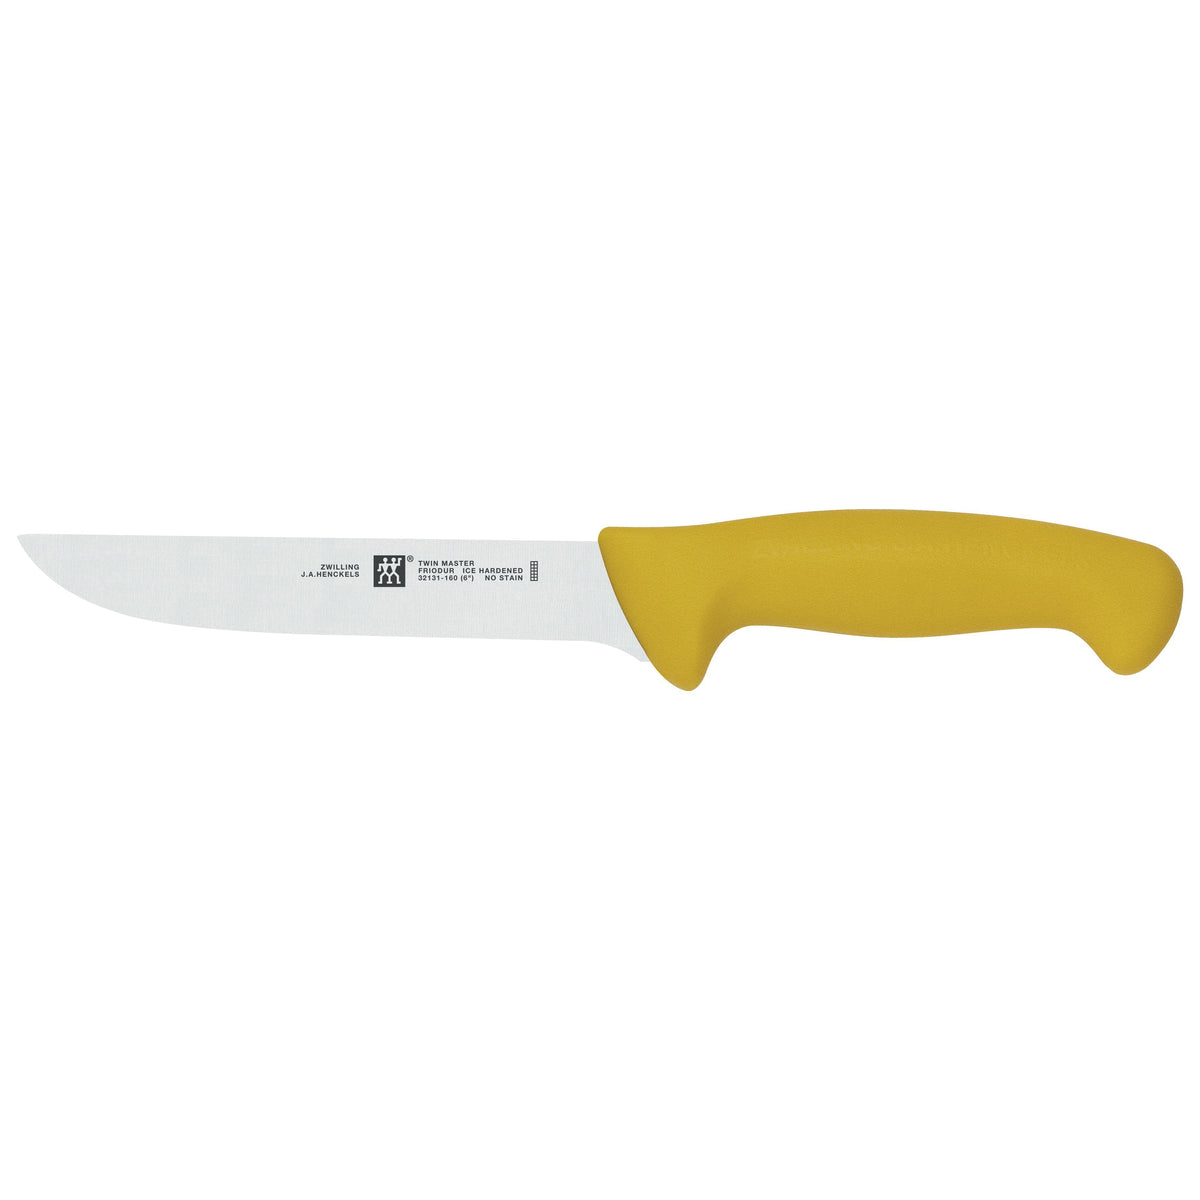 https://www.bigerics.shop/wp-content/uploads/1694/39/buy-the-newest-zwilling-twin-master-6-1-2-boning-knife-32131-160-zwilling-ja-henckels-can-products-at-a-reasonable-price_0.jpg